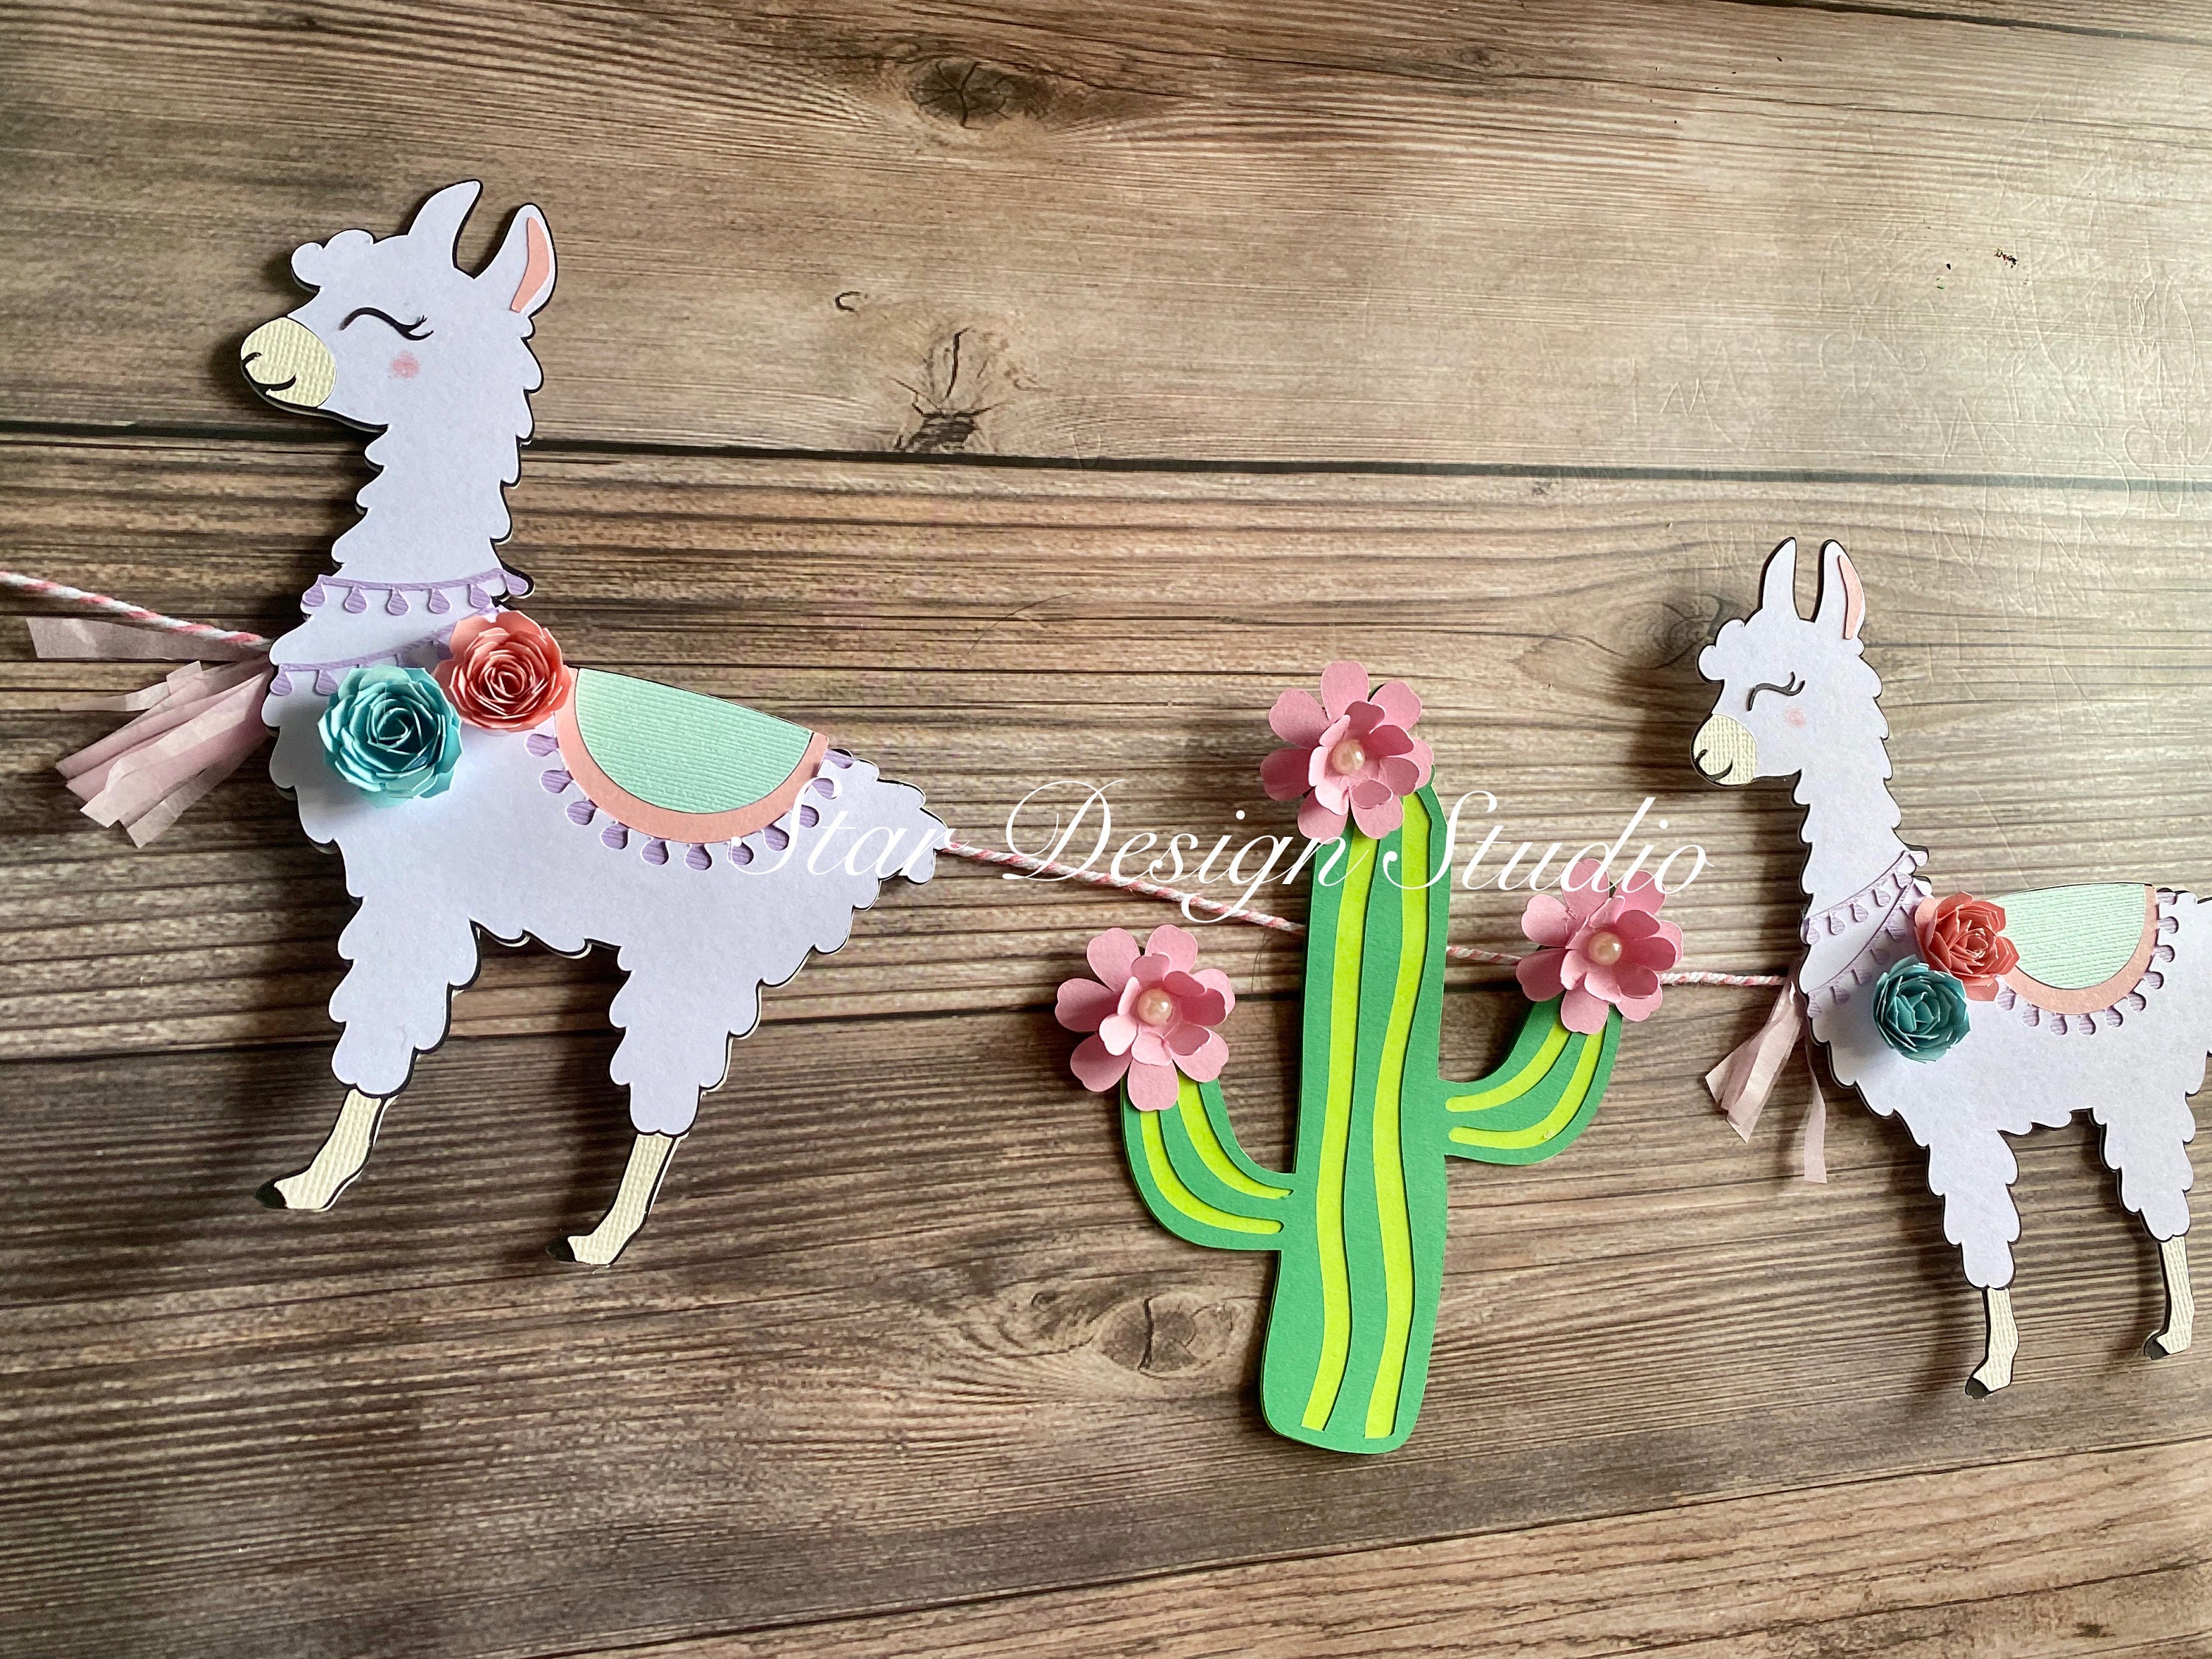 Fiesta Party Decorations Cactus Balloons Hanging Paper Fans Mexican Llama  Banner Garland Tassel Garland Backdrop String For Bachelorette Kids Taco